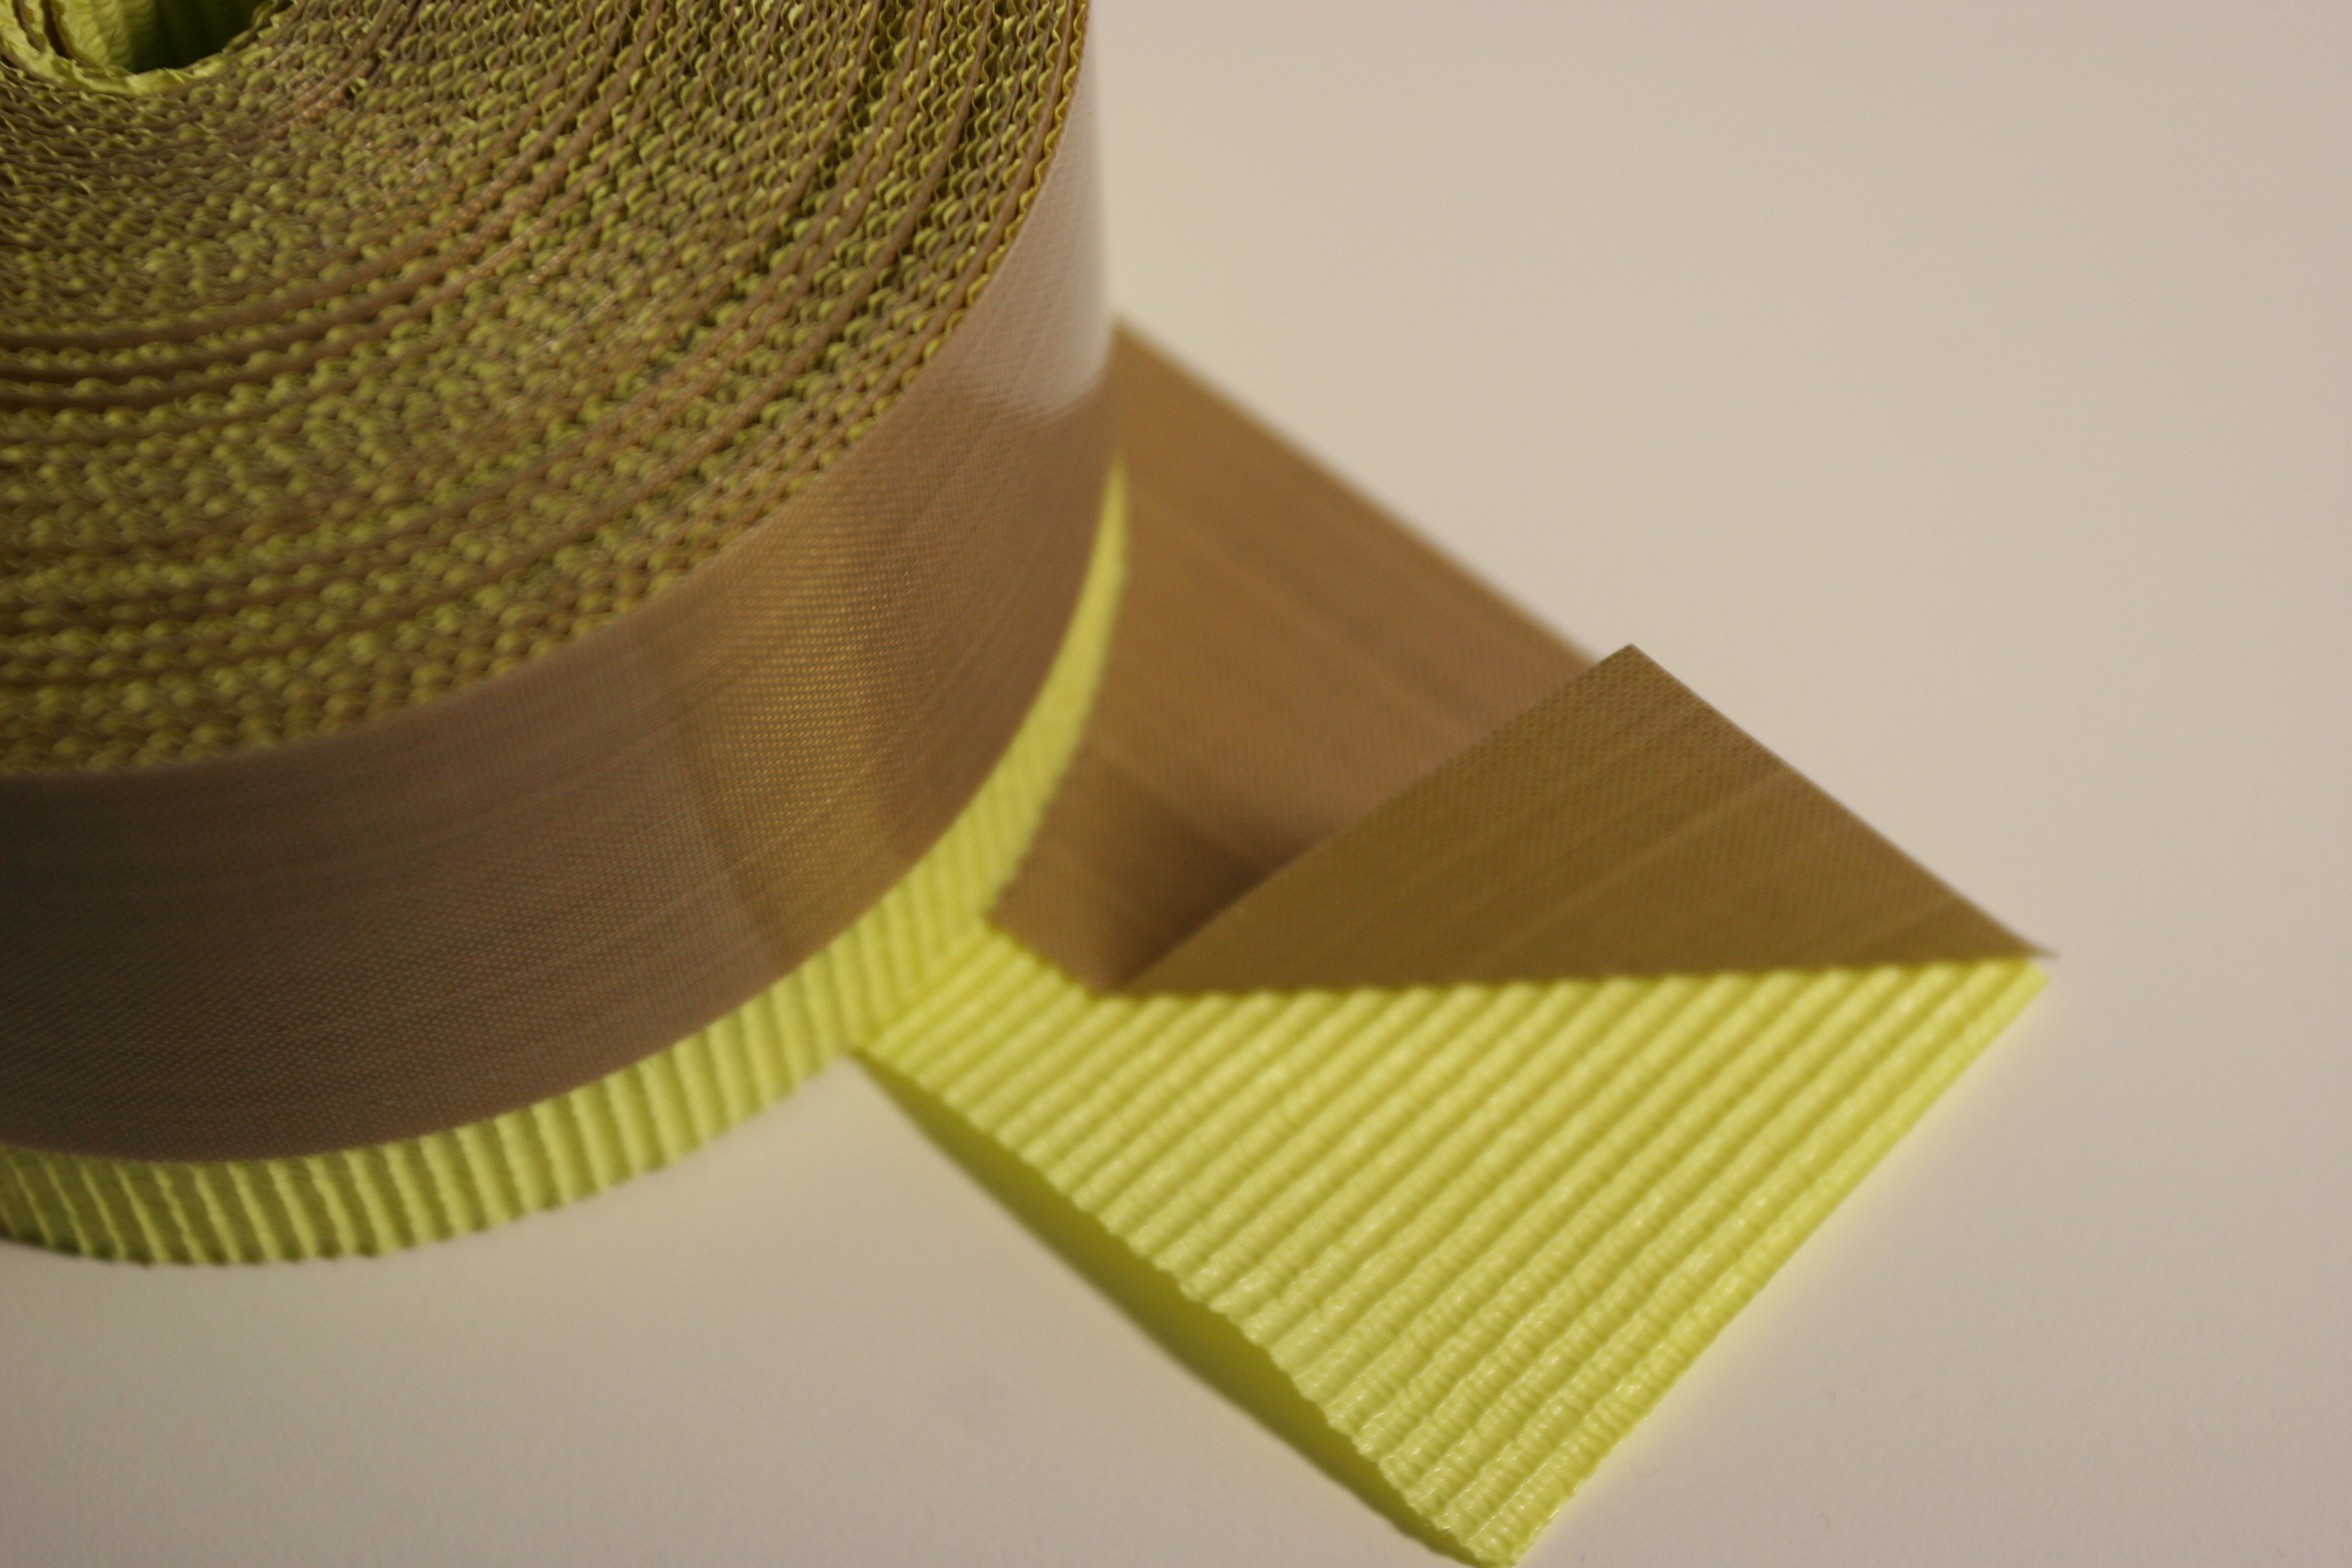 PTFE Coated Glass Fabric Tape w/Liner - 1 X 3